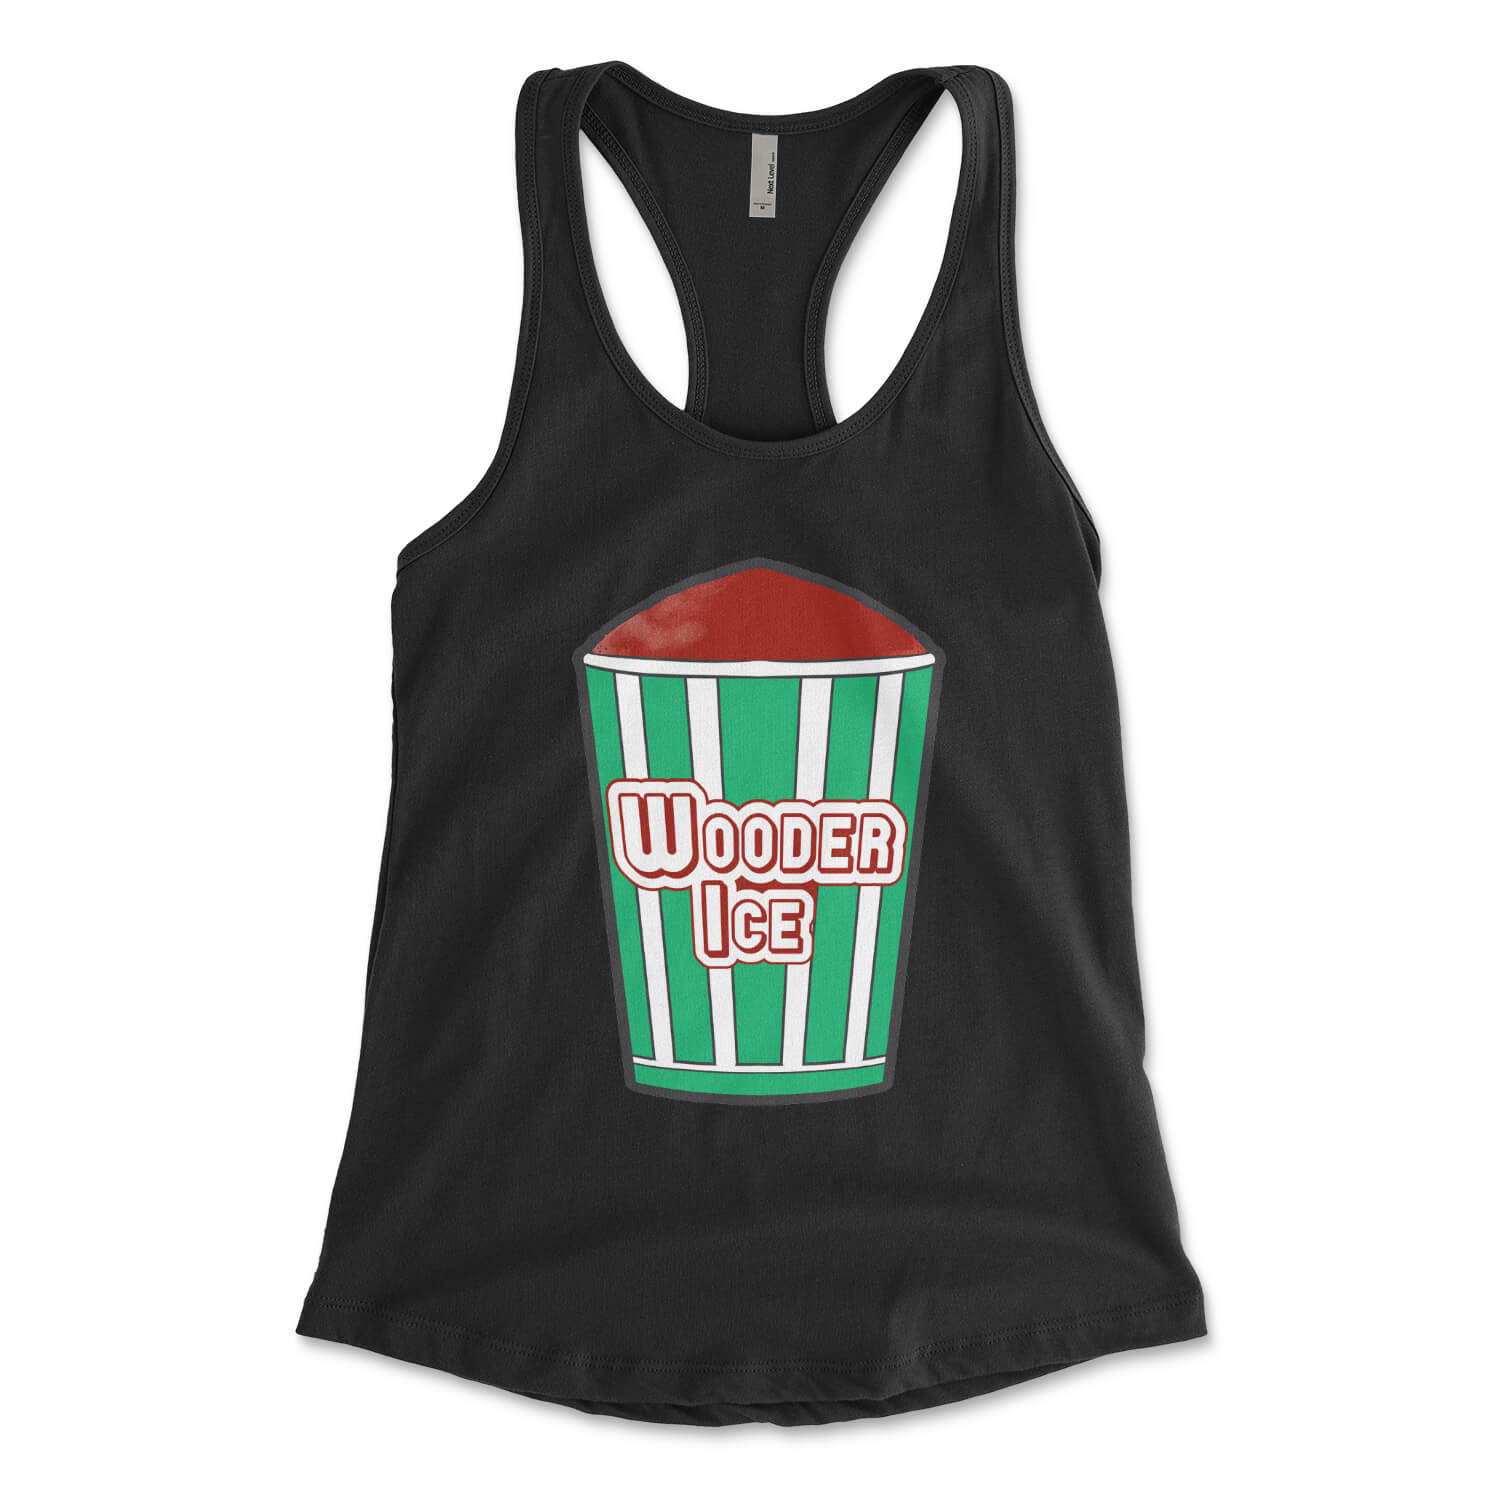 Philadelphia Philly water ice wooder ice black womens racerback tank top from Phillygoat